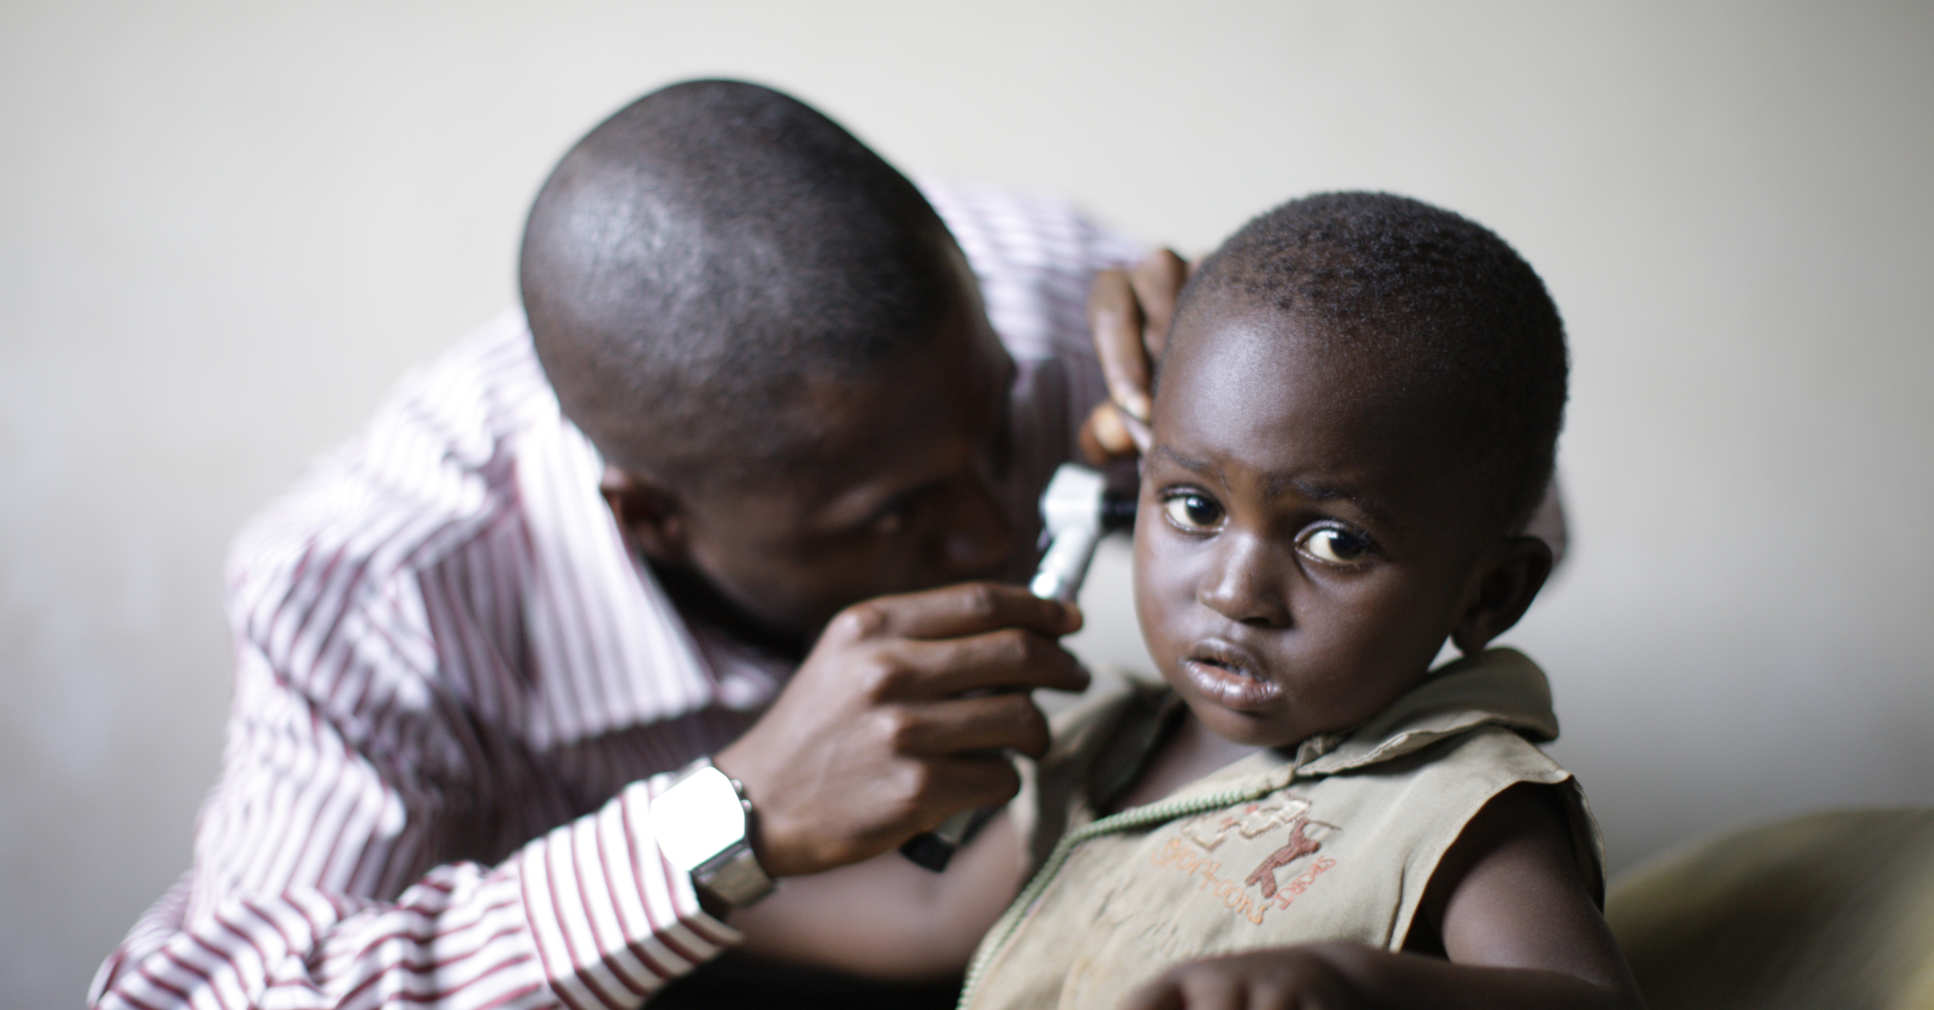 A young African child getting examined by a doctor